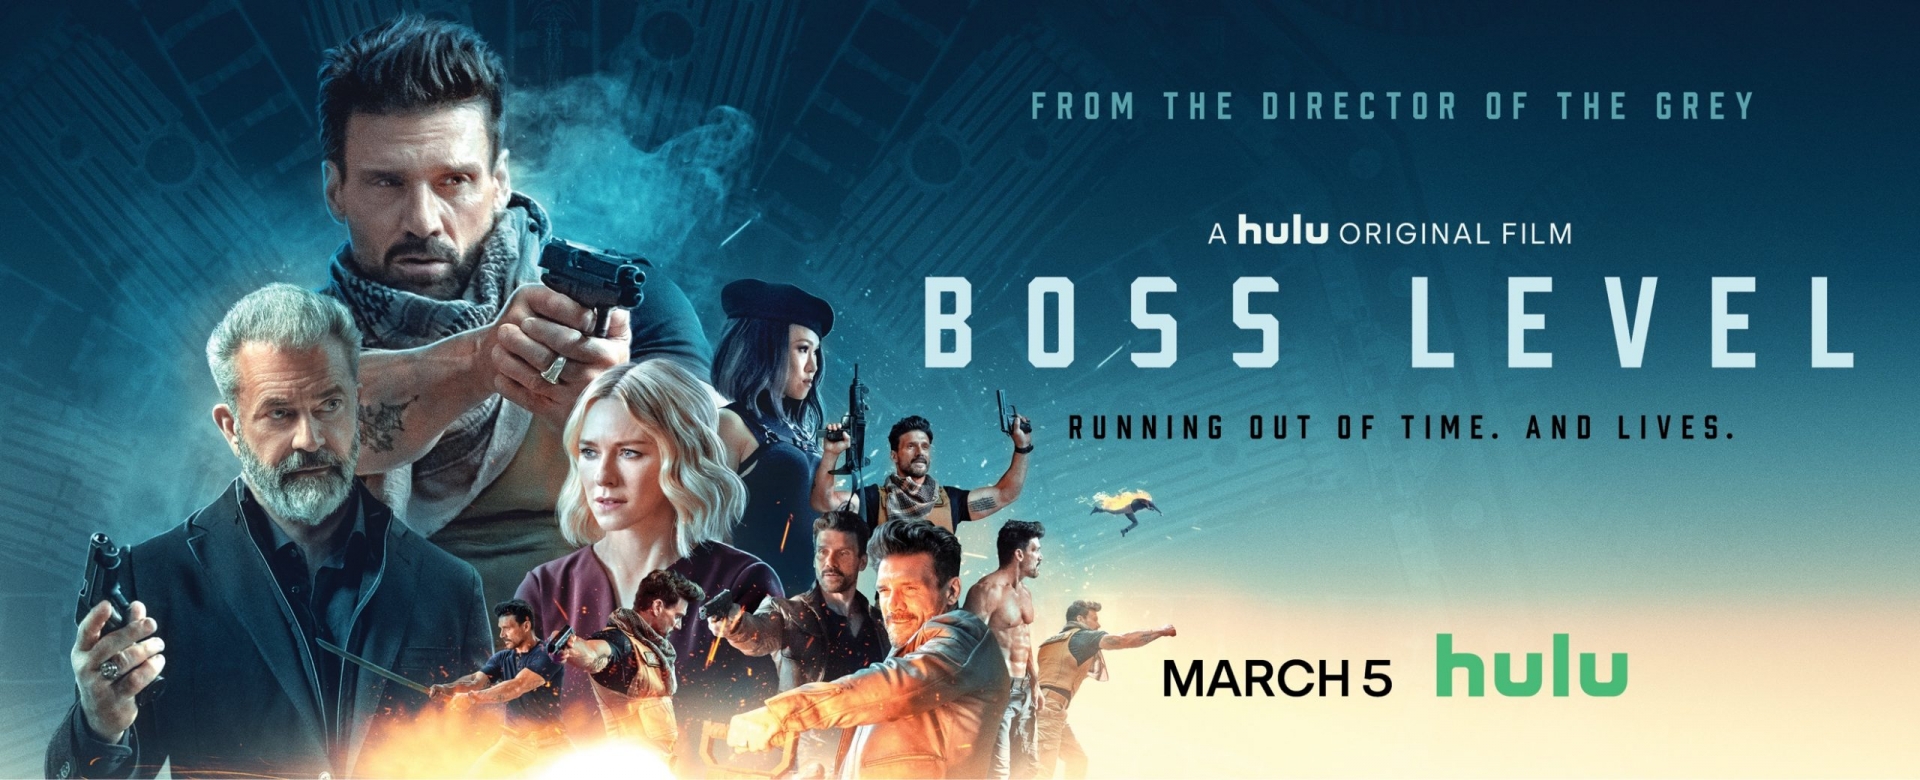 Boss Level Premiere on Hulu: Release Date, How to Watch